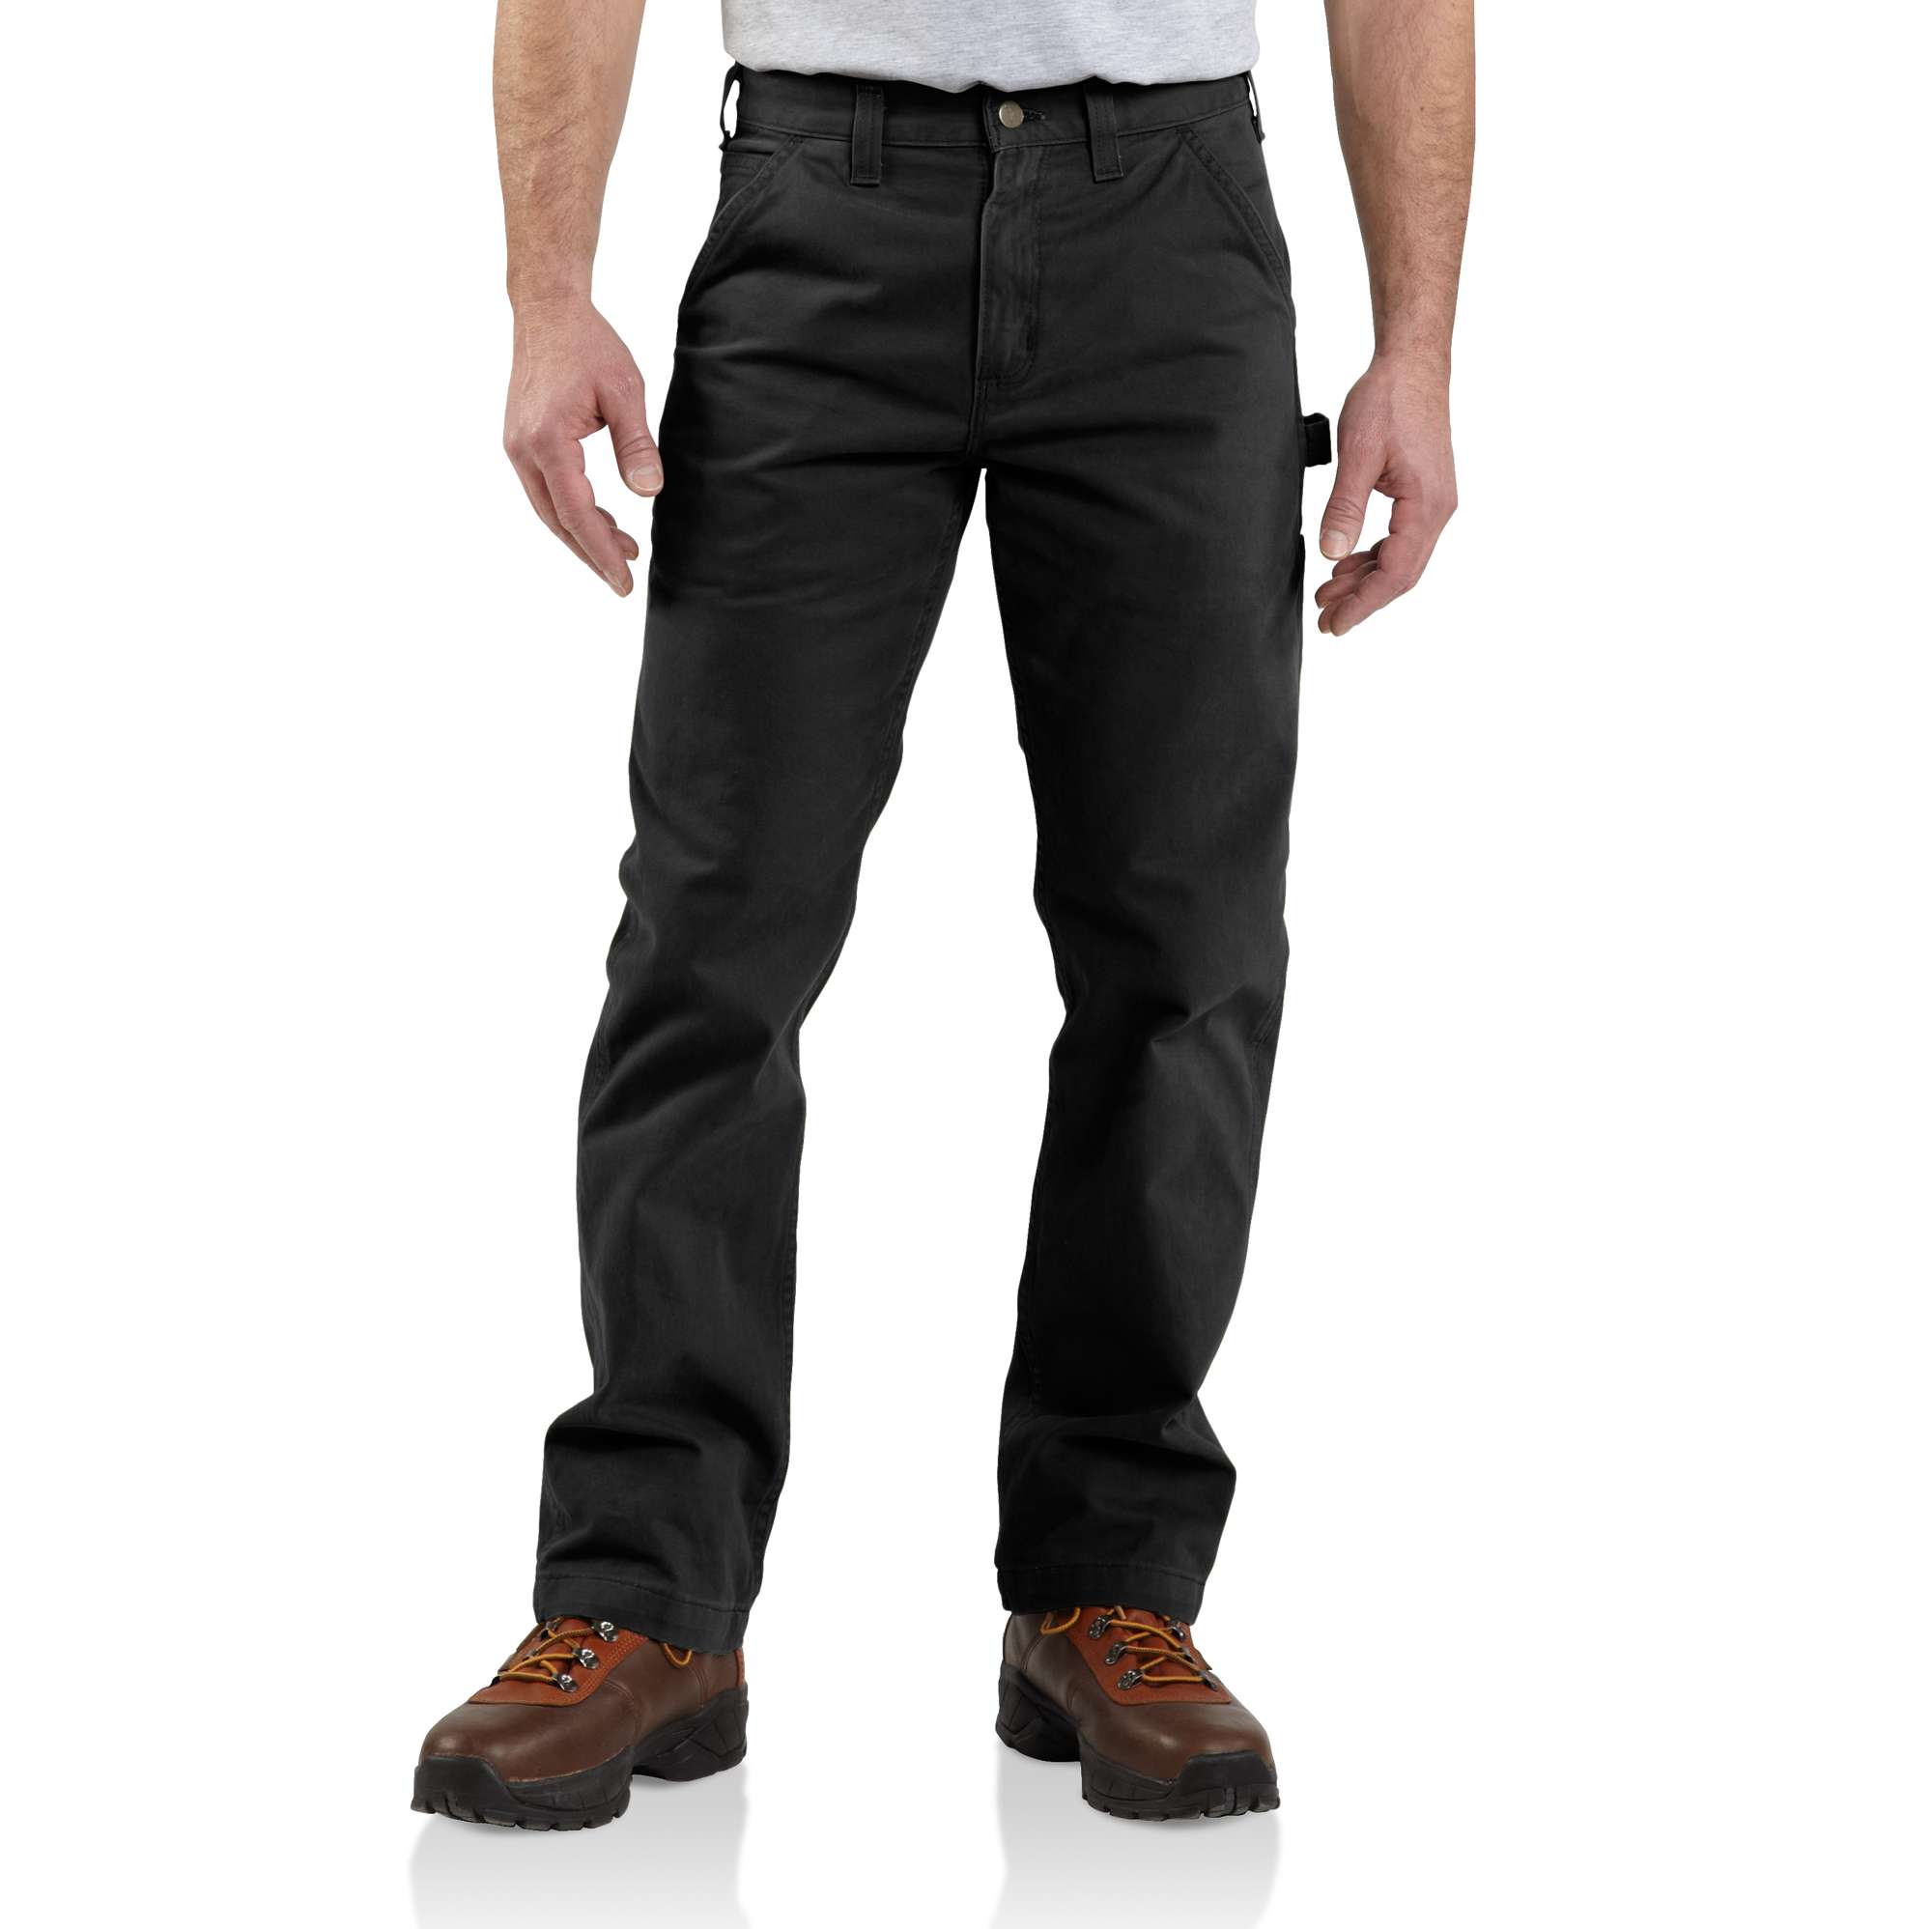 Buy Nuon Olive Relaxed Fit Full Length Cargo Trousers from Westside